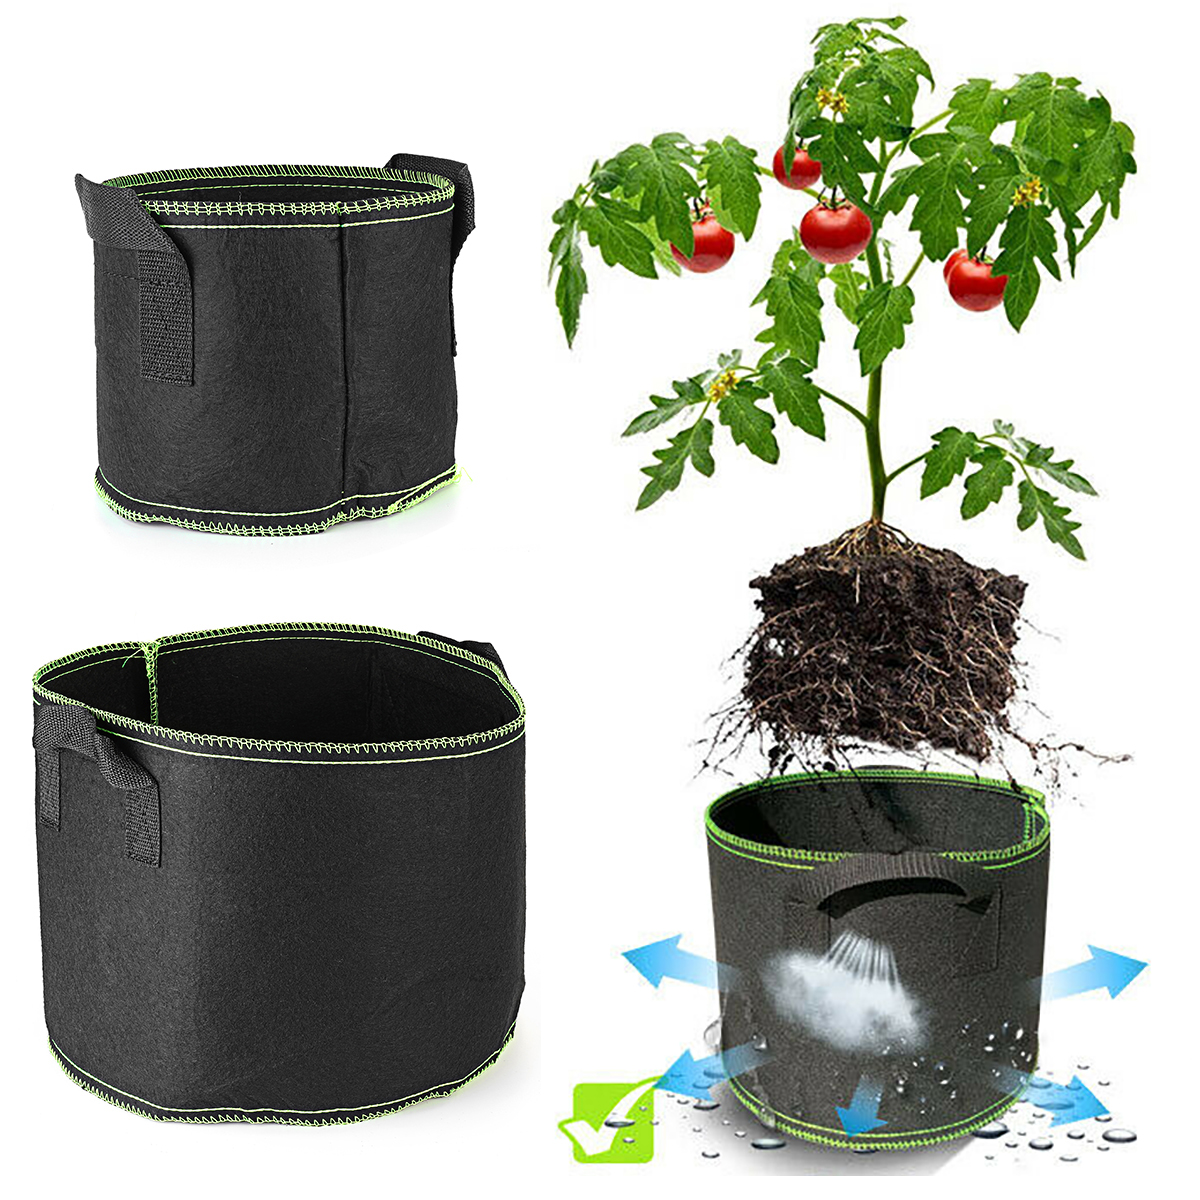 Plant-Growing-Bag-Aeration-Non-woven-Fabric-Pots-Container-Grow-Bag-1702877-4